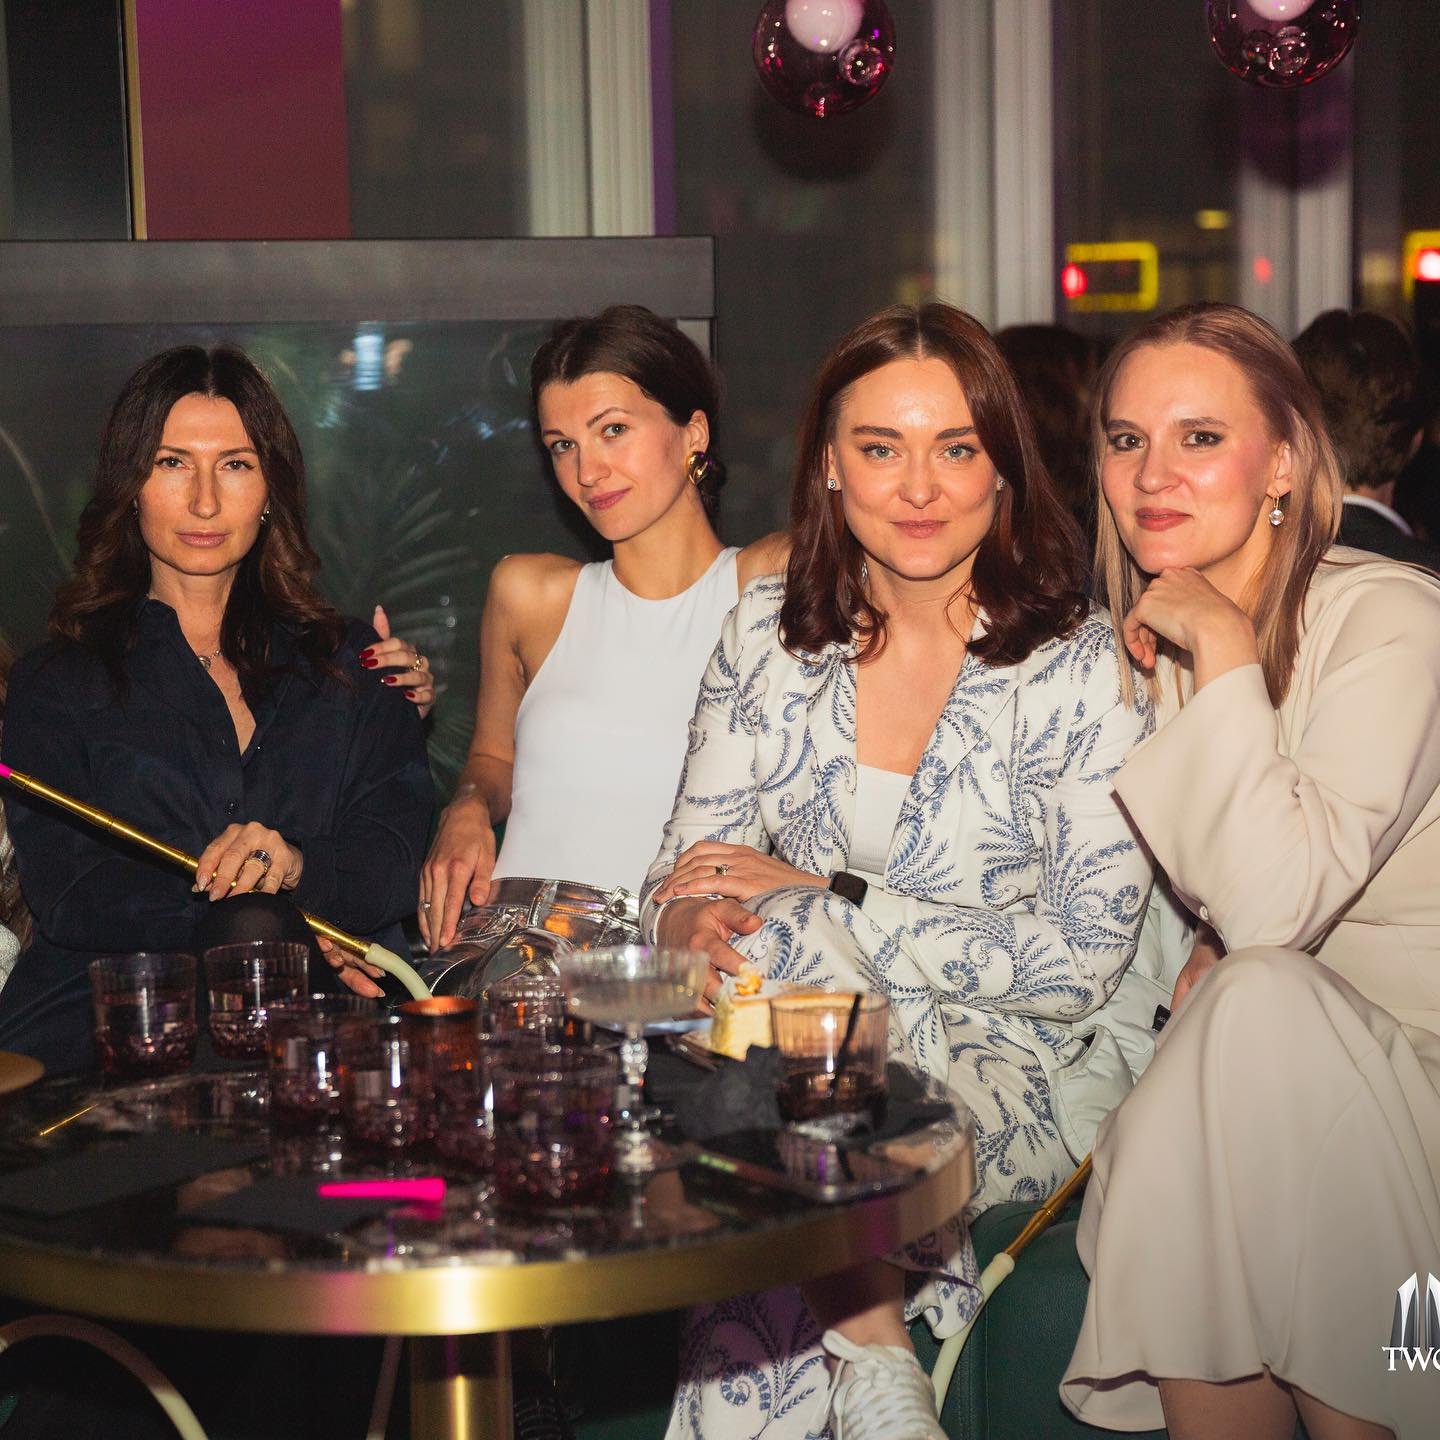 🎶🍹💃 Step into the ultimate hotspot loved by all, especially the fabulous ladies! Welcome to The 6 Lounge in Calgary, where music, drinks, and shisha await to elevate your experience. 

🌟 Let the beats move you, the drinks refresh you, and the shi